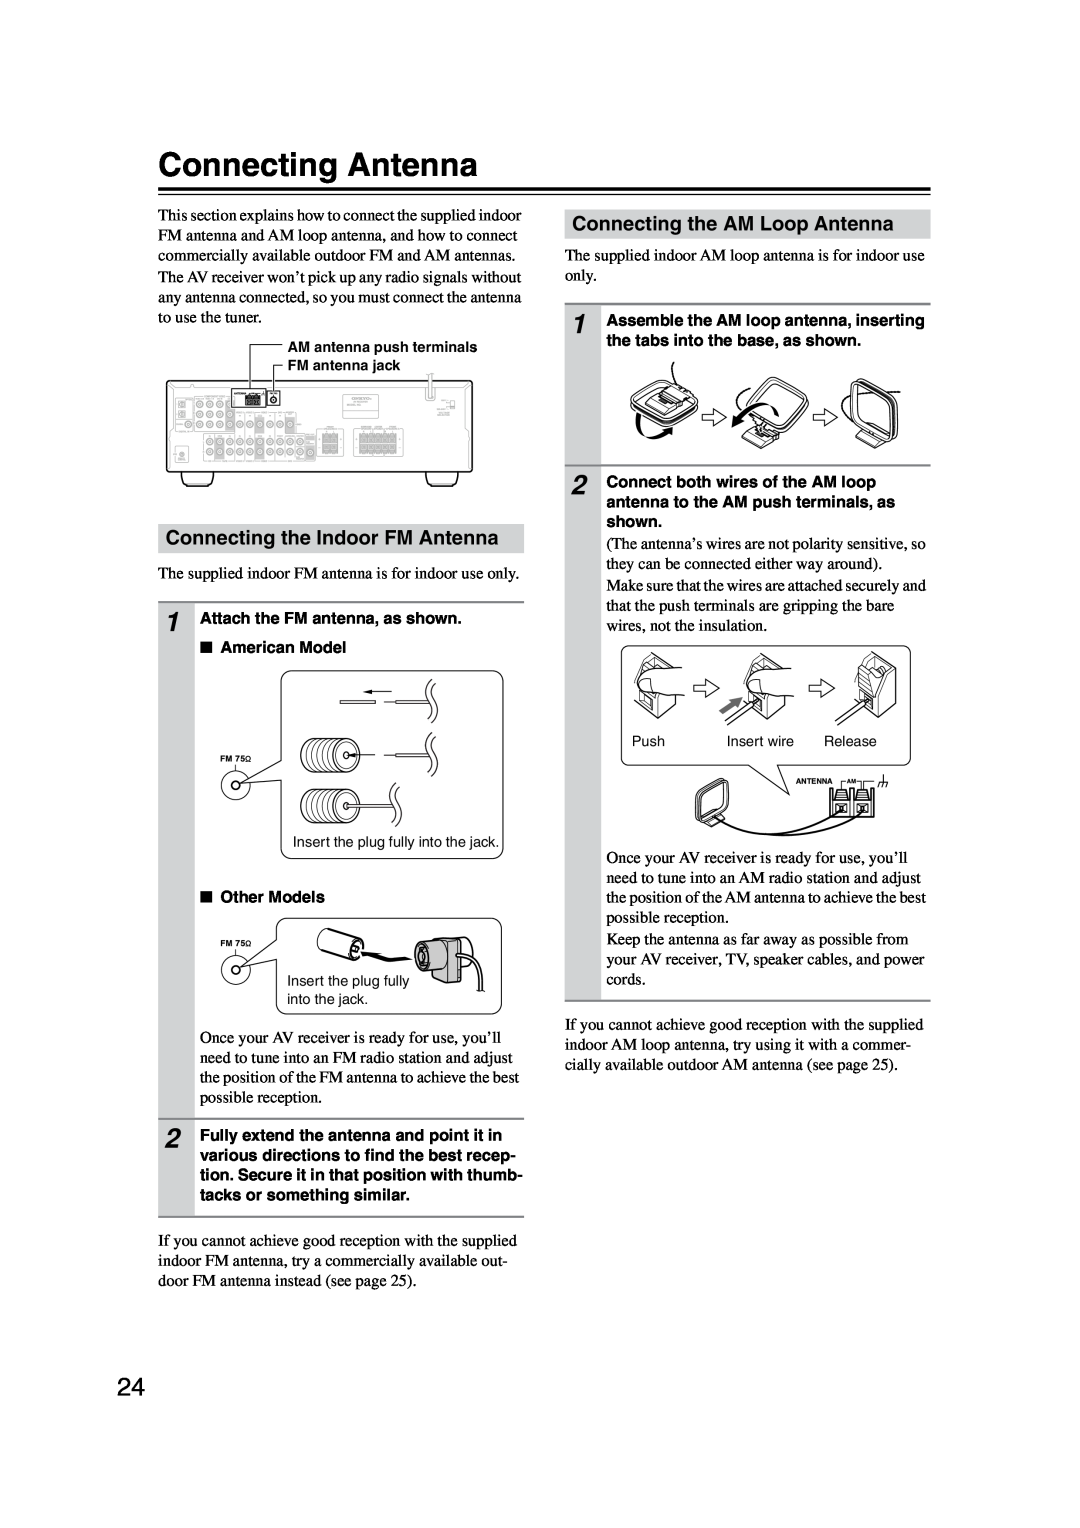 Onkyo HT-S4100 instruction manual Connecting Antenna, Connecting the AM Loop Antenna, Connecting the Indoor FM Antenna 